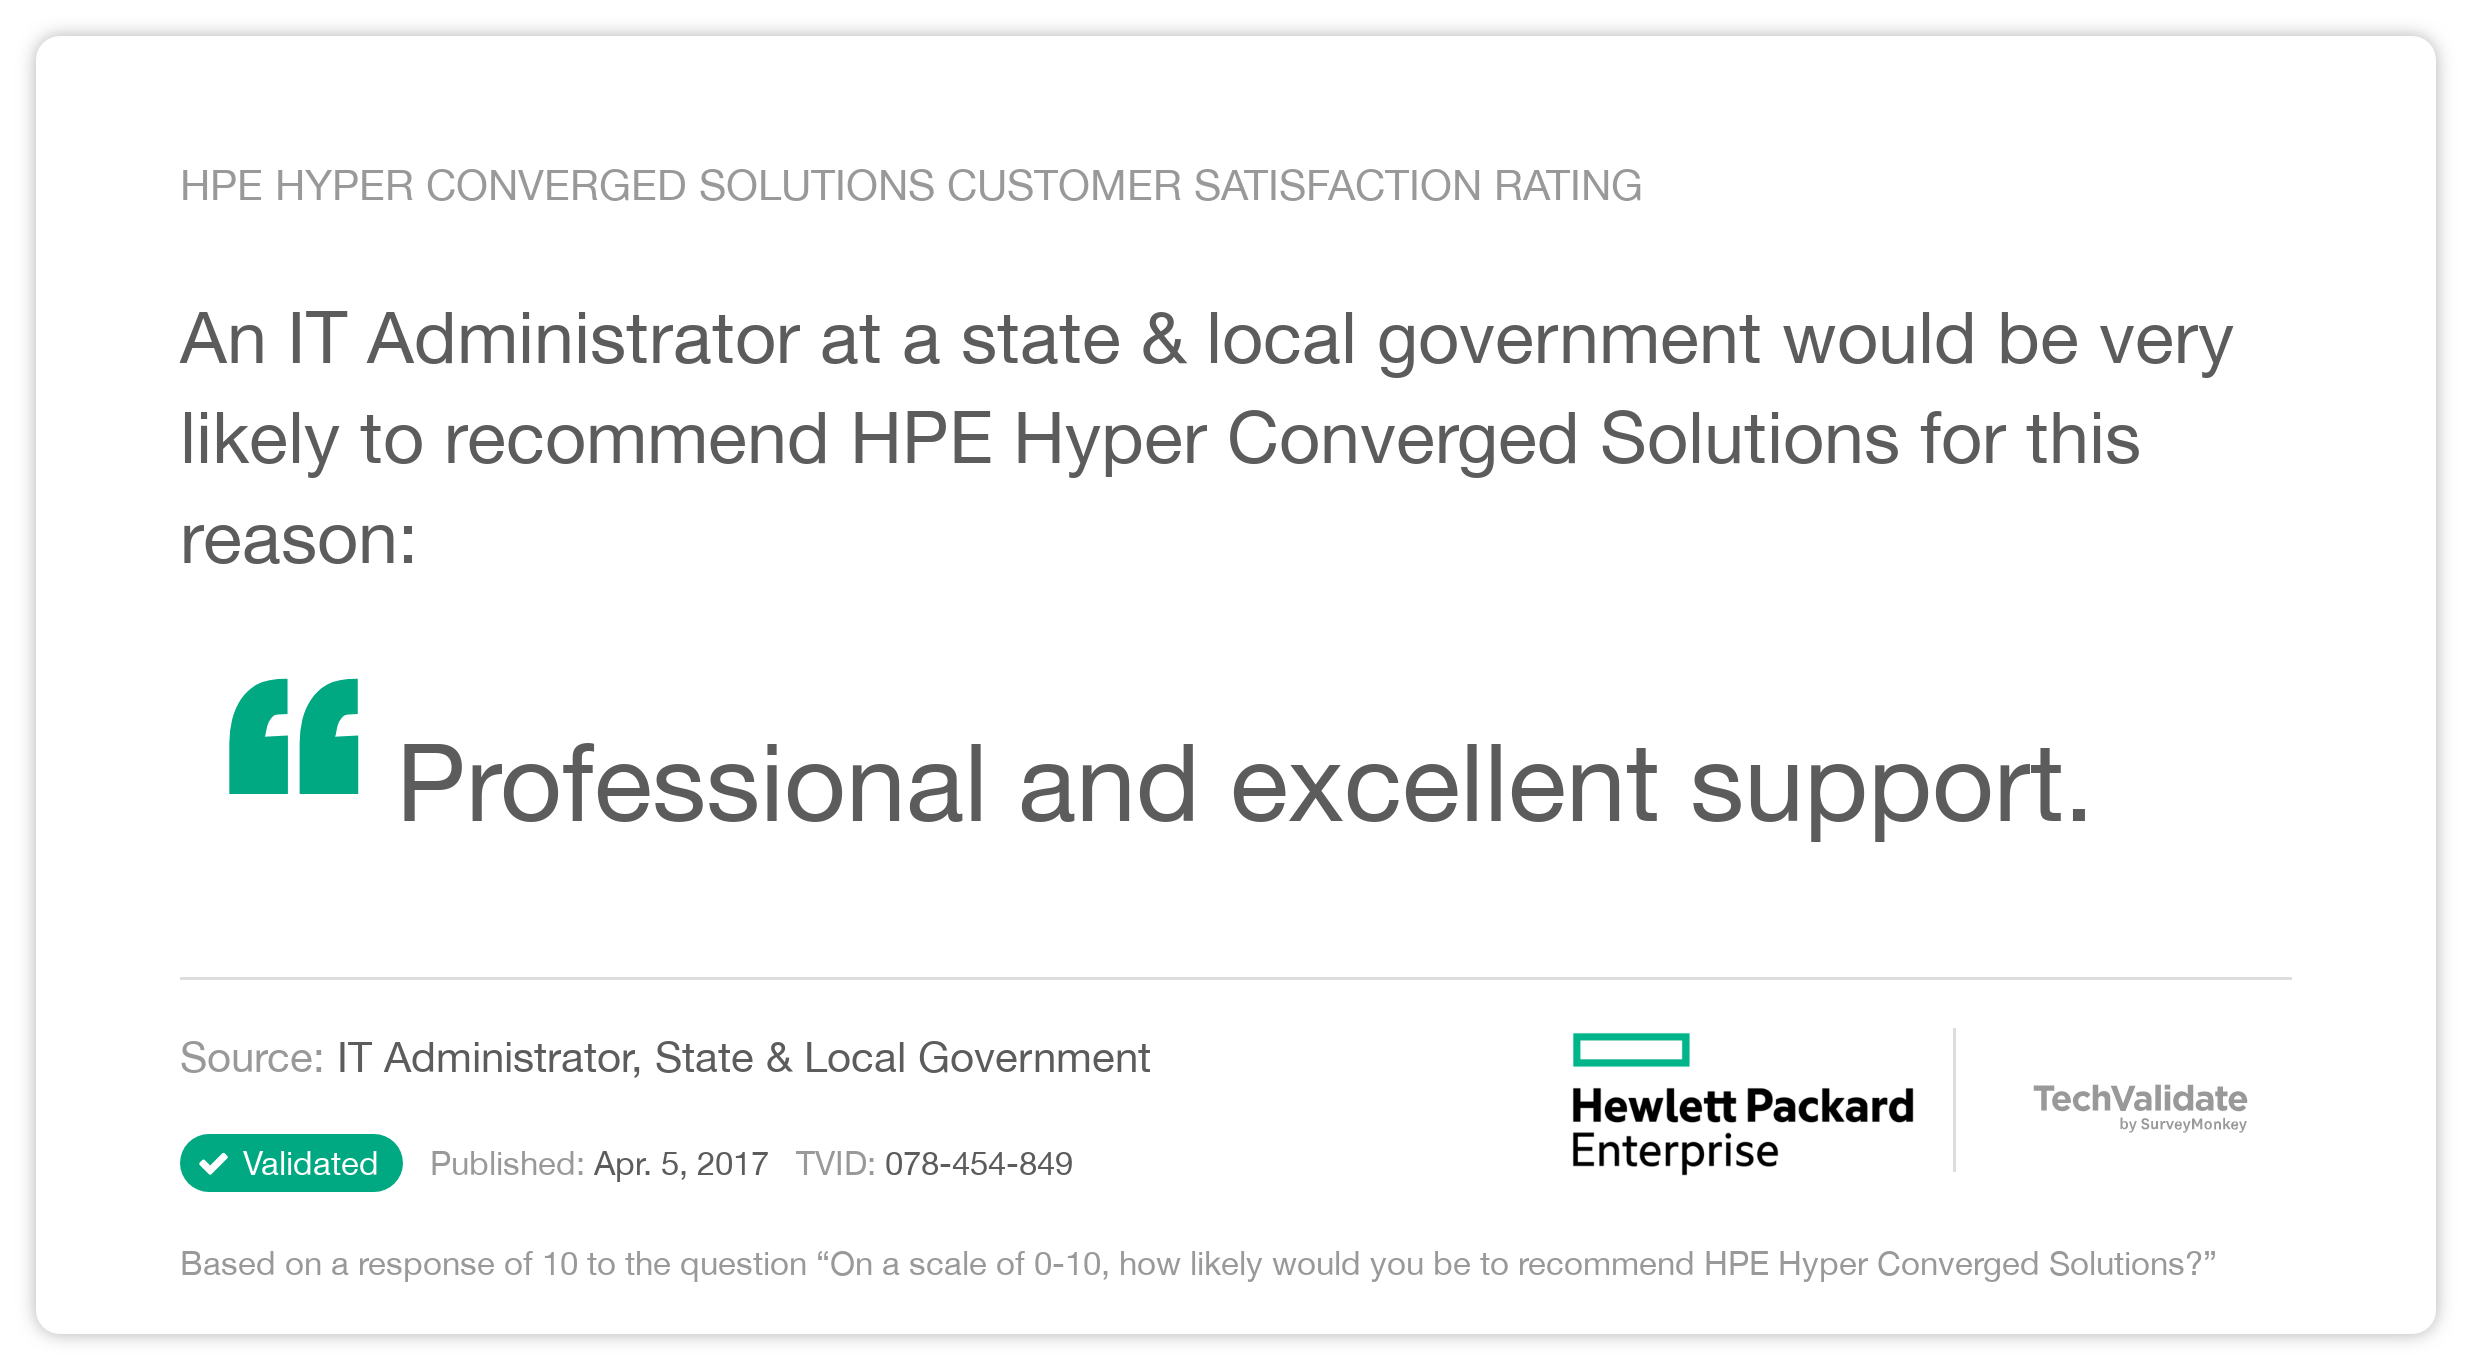 HPE Hyper Converged Solutions Customer Satisfaction Rating